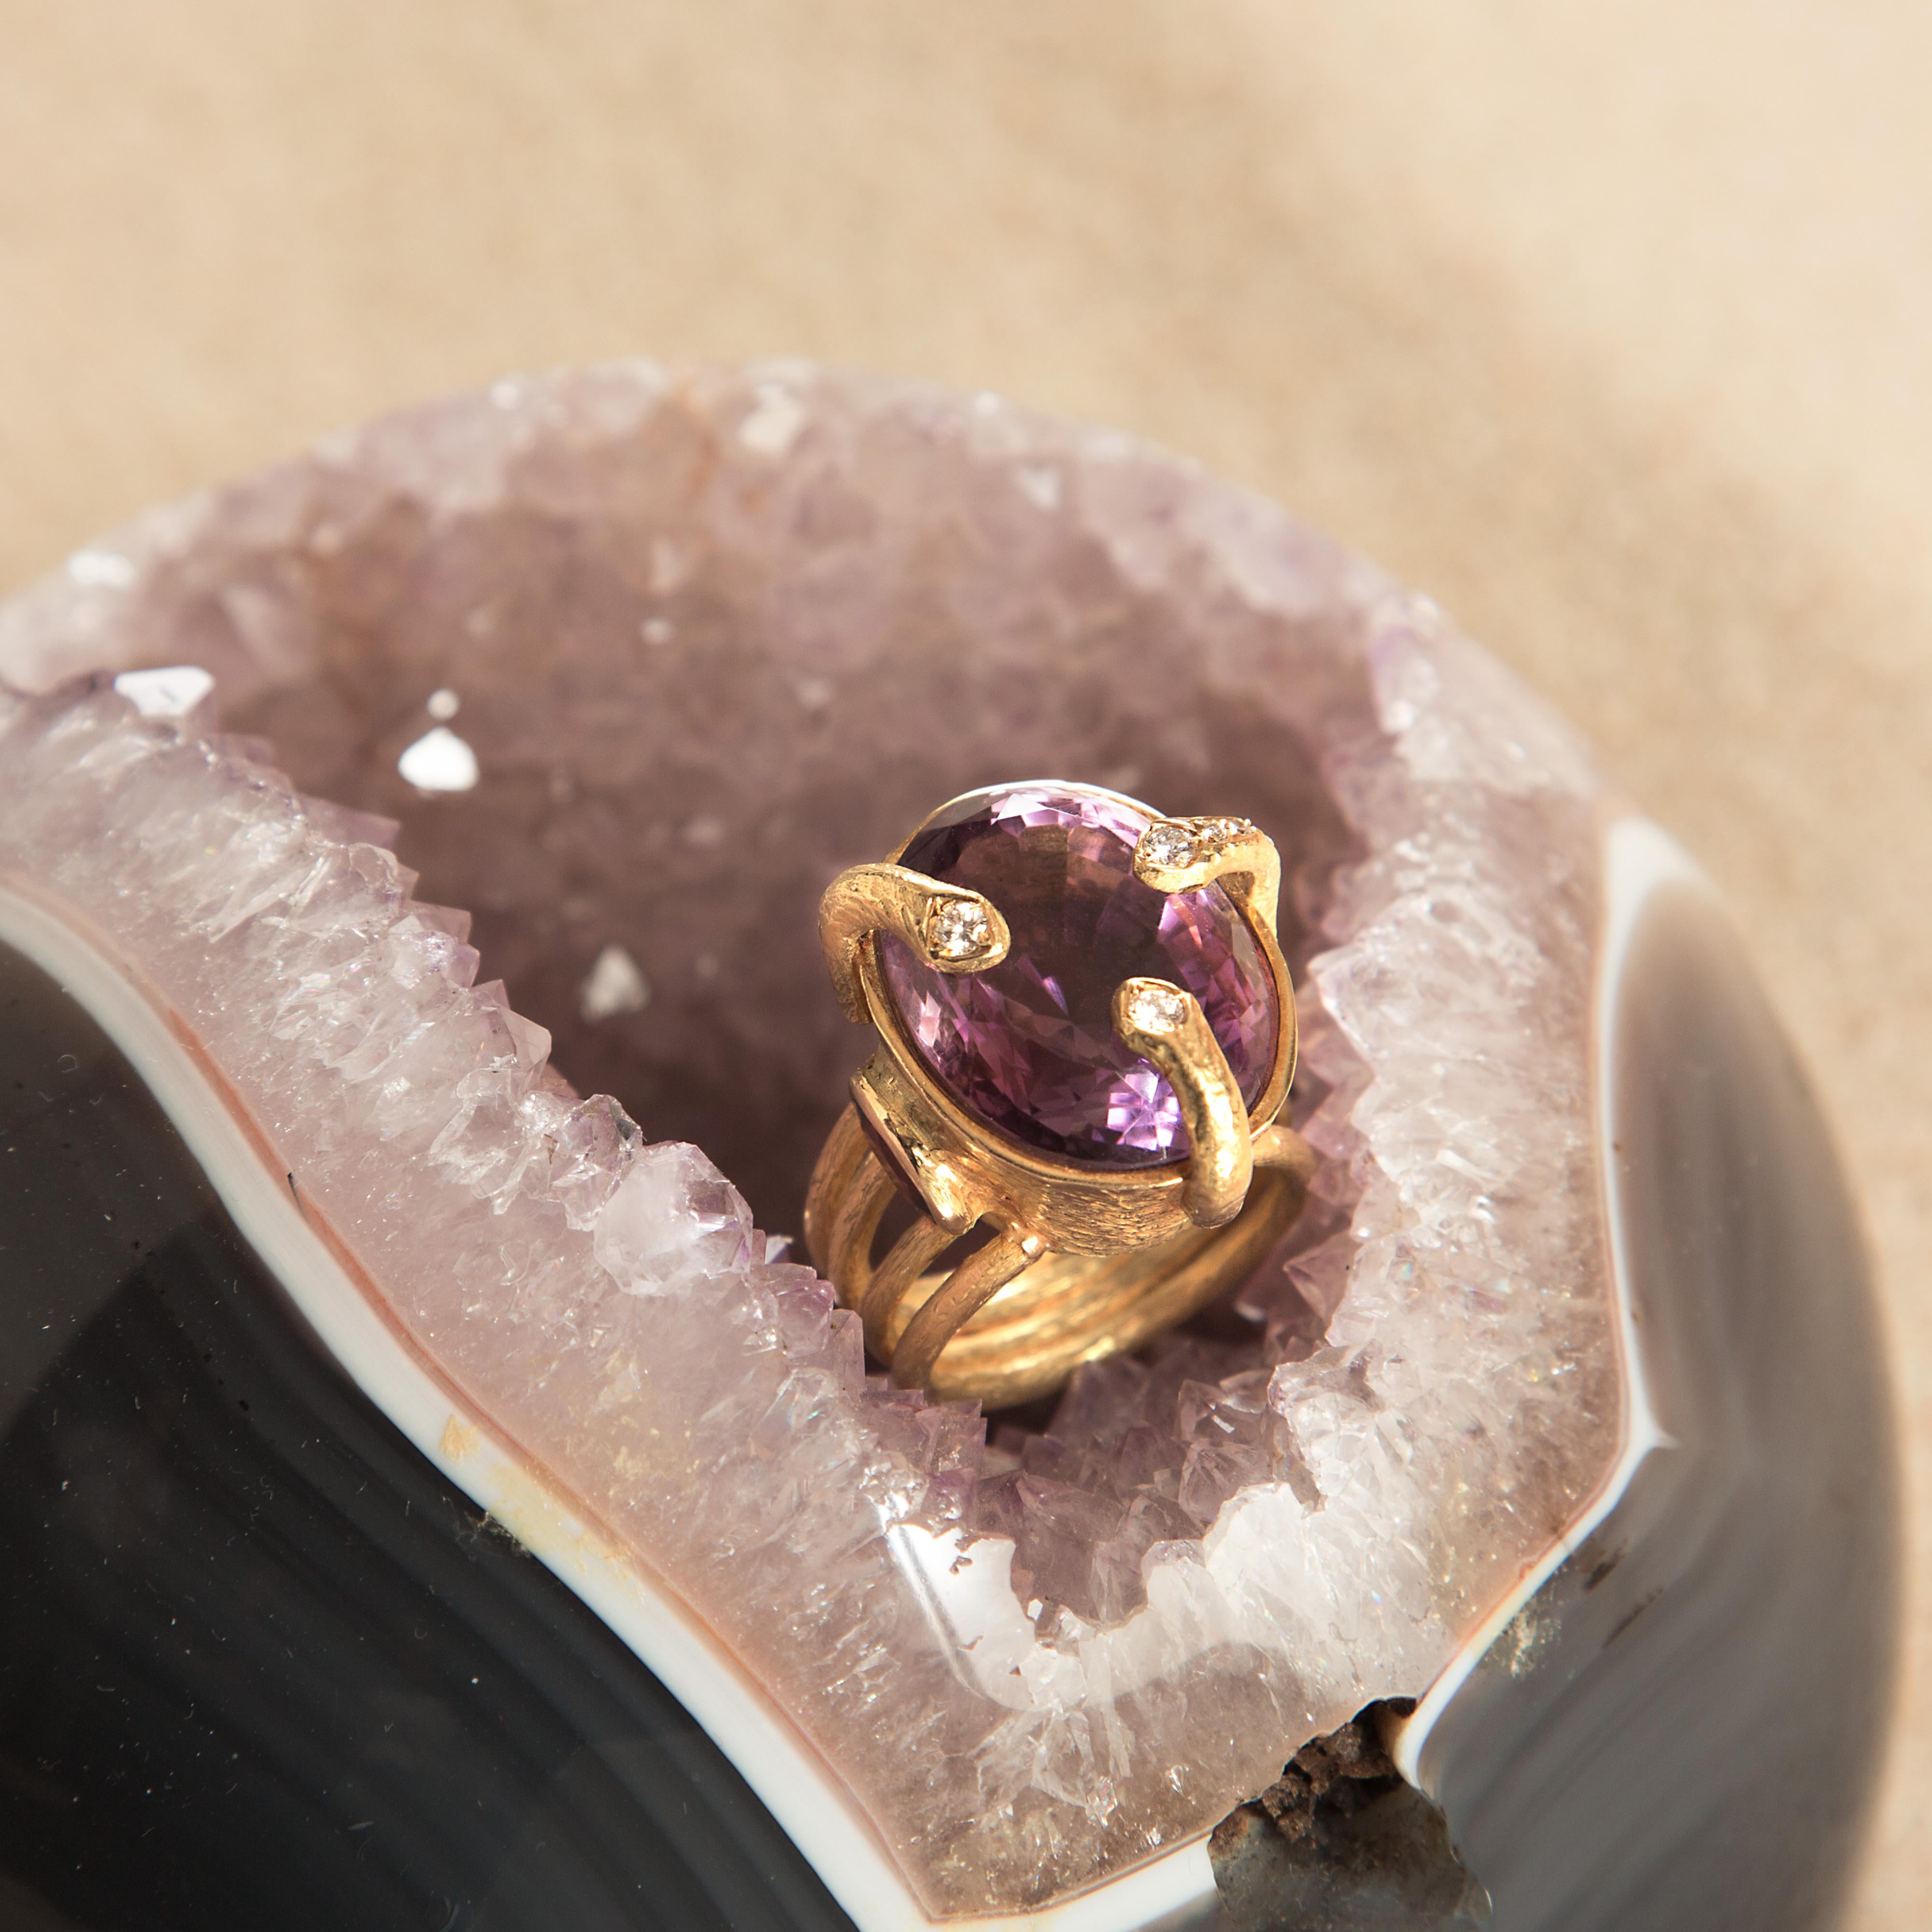 Rare and magnificent natural amethyst surrounded by a mixed 18 karat yellow gold ring embellished by three diamonds.  

This royal jewel is inspired by the power of the stones, the amethyst with a deep purple color represents the passion and